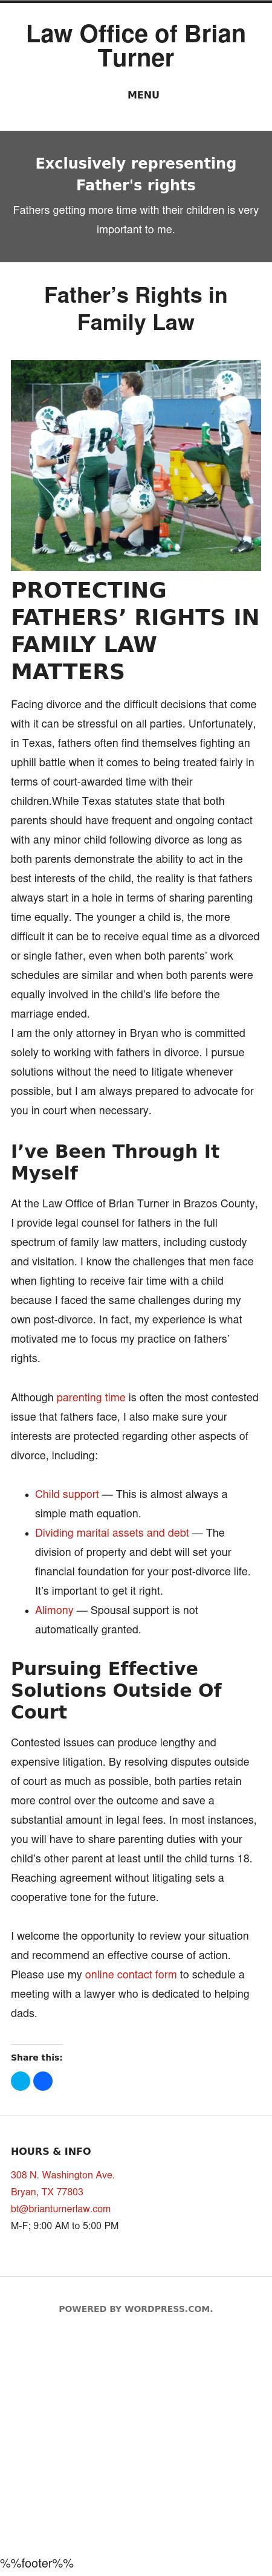 Law Office of Brian Turner - Austin TX Lawyers